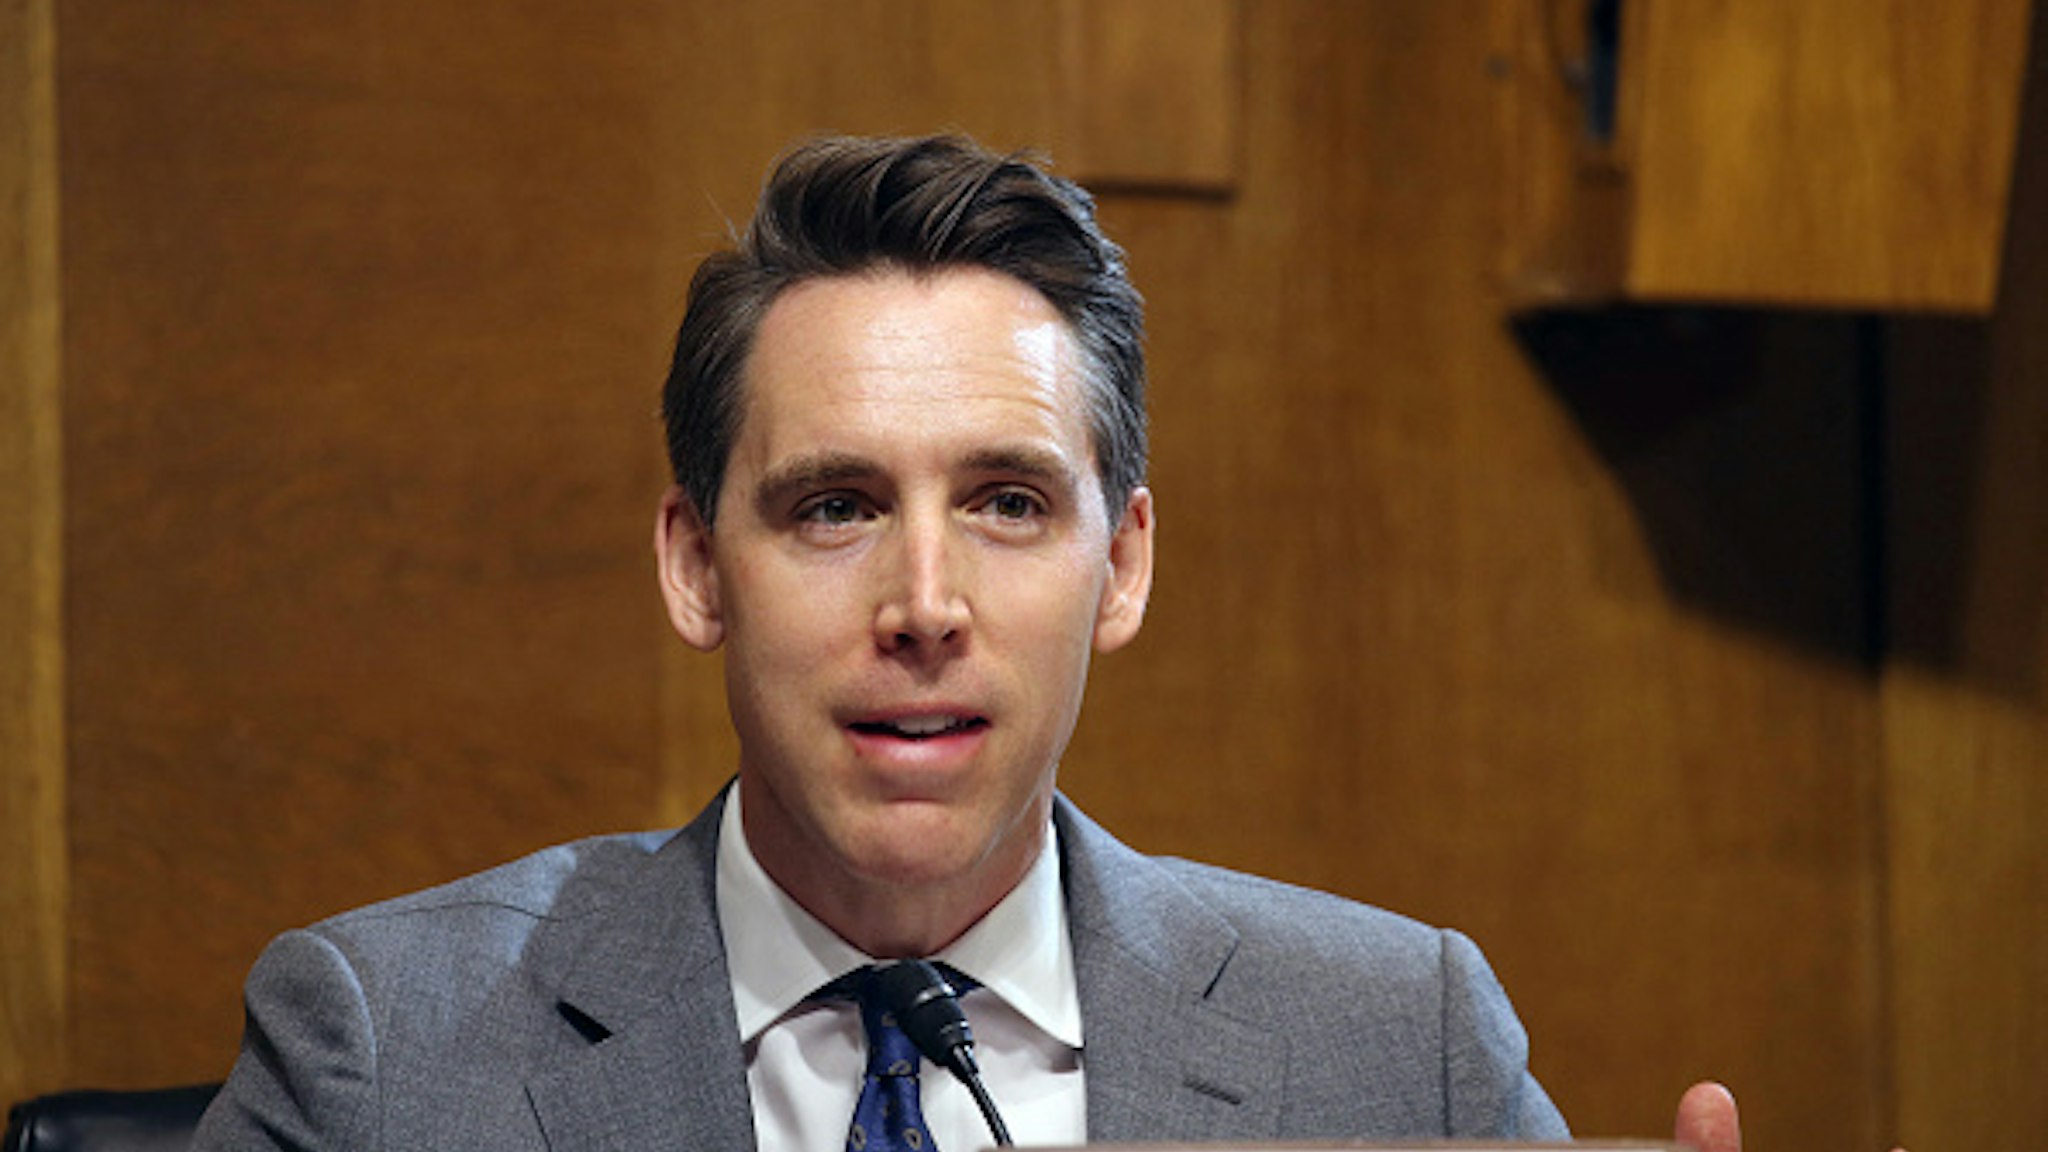 Sen. Josh Hawley, R-MO, asks questions during a hearing of the Senate Judiciary Subcommittee on Privacy, Technology, and the Law, at the US Capitol in Washington DC, on April 27, 2021. - The committee will hear testimony about social media platforms' use of algorithms and amplification.